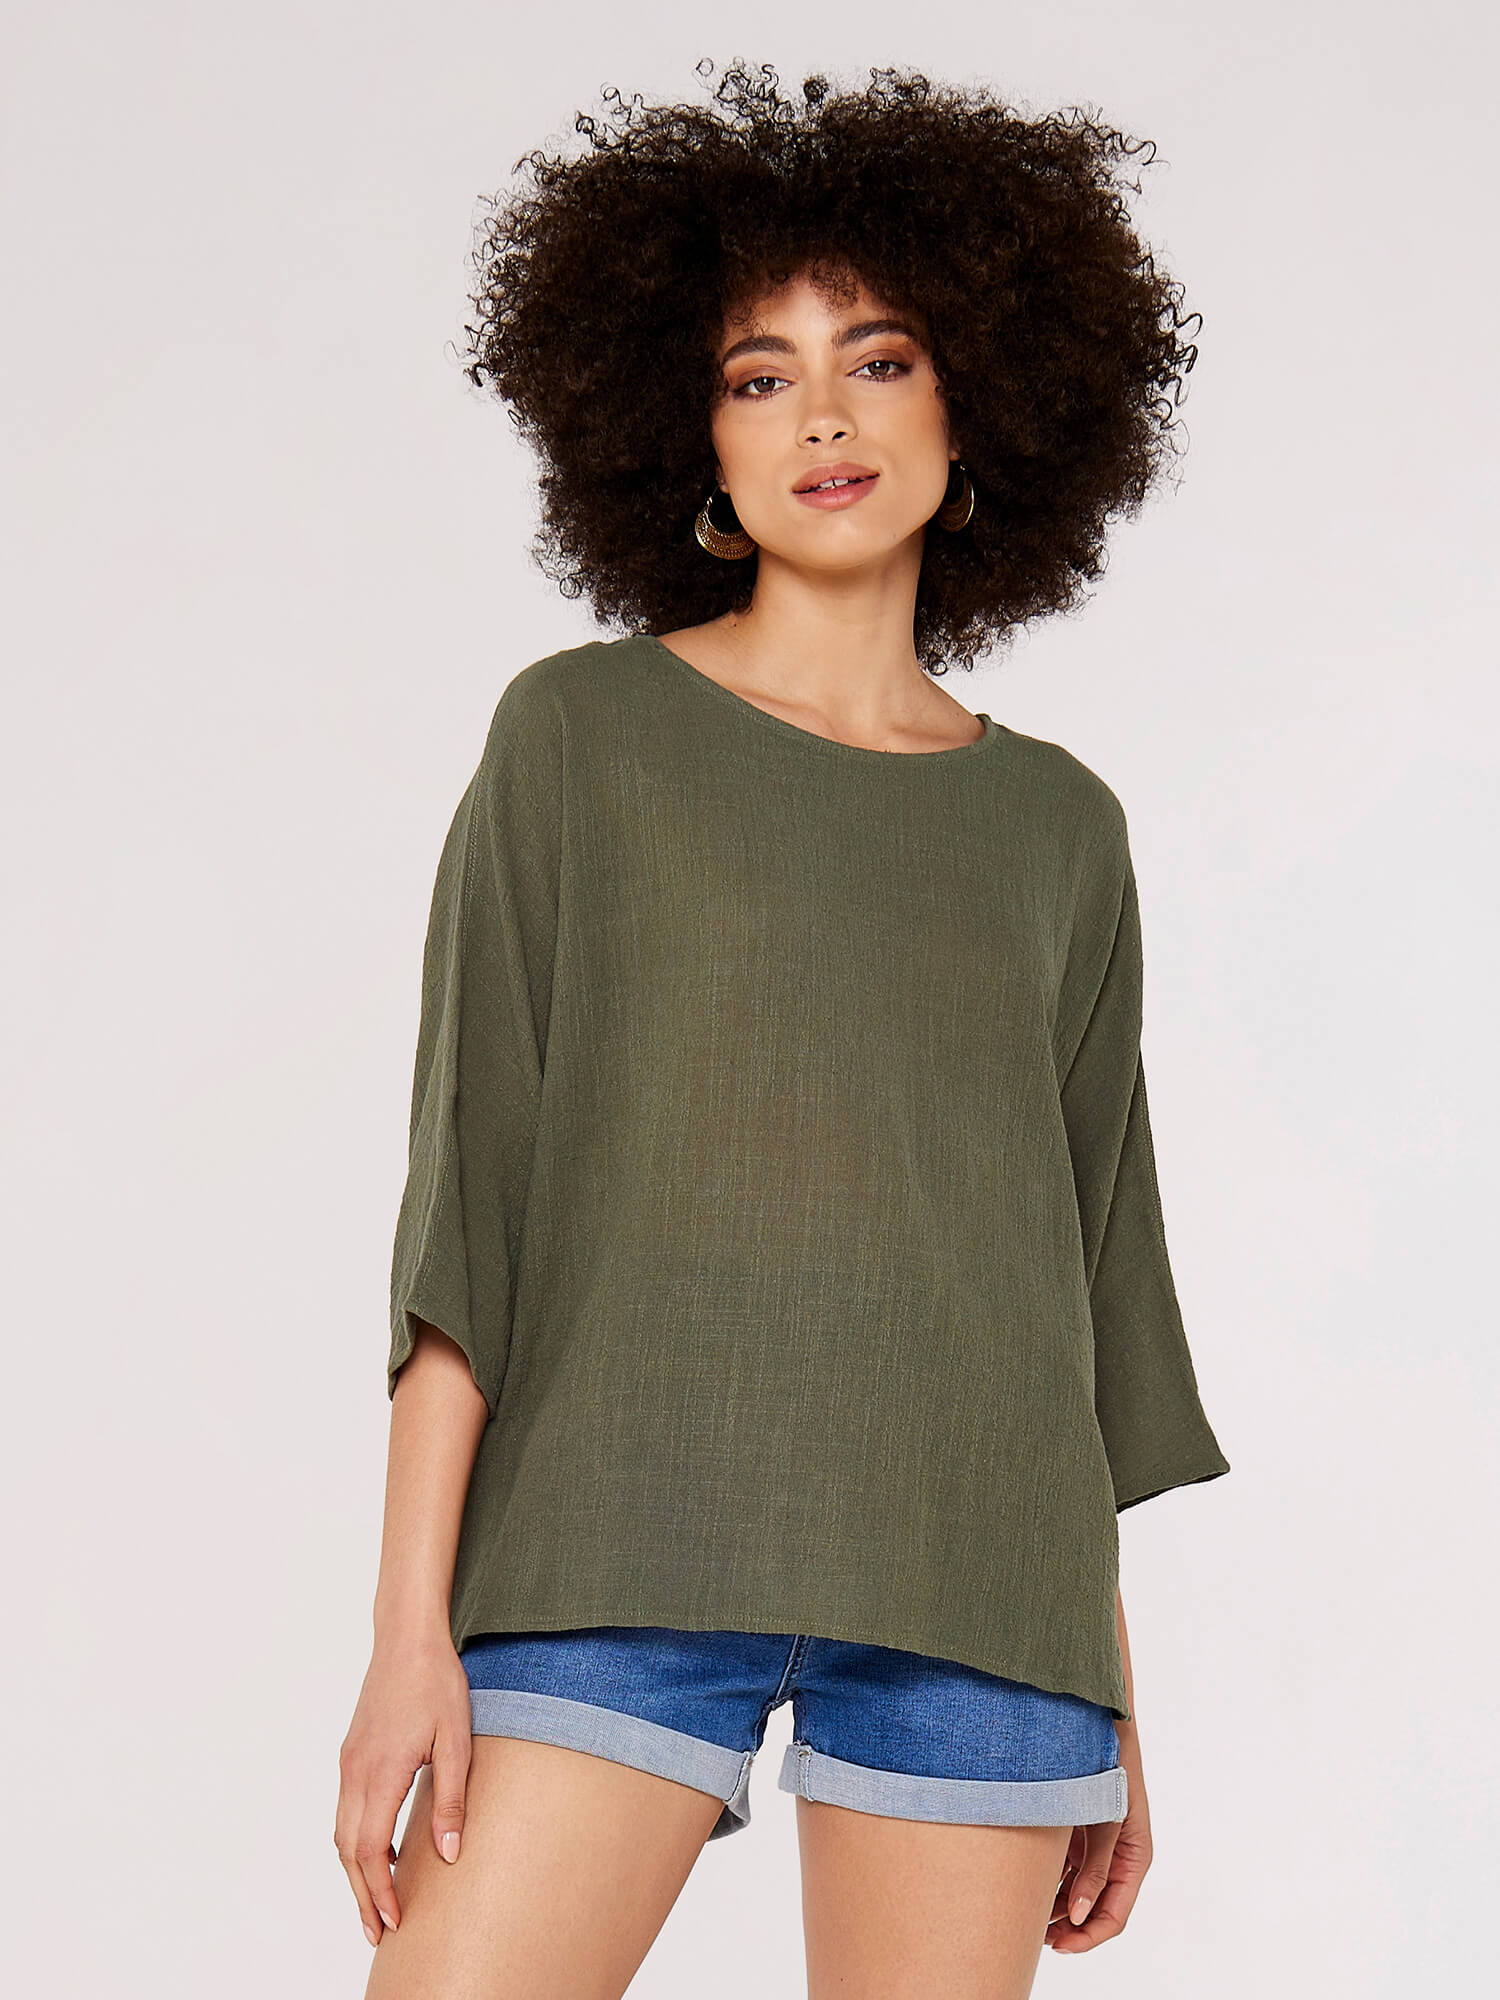 Oversized Top | Apricot Clothing